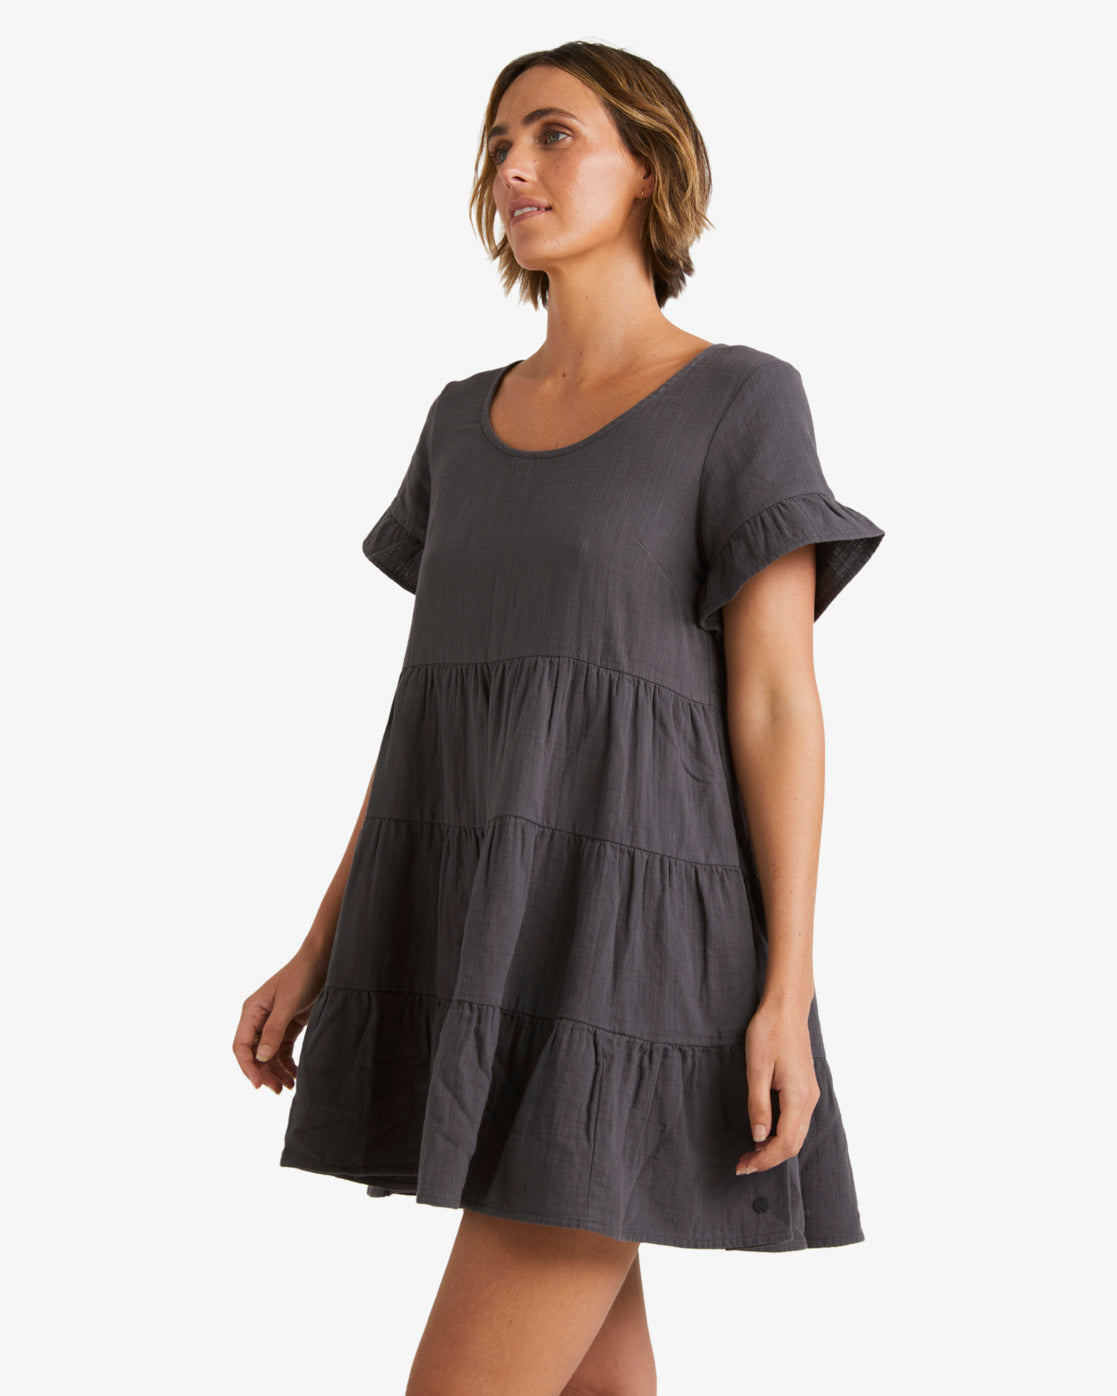 Billabong Pixie Dress in washed black on model from side